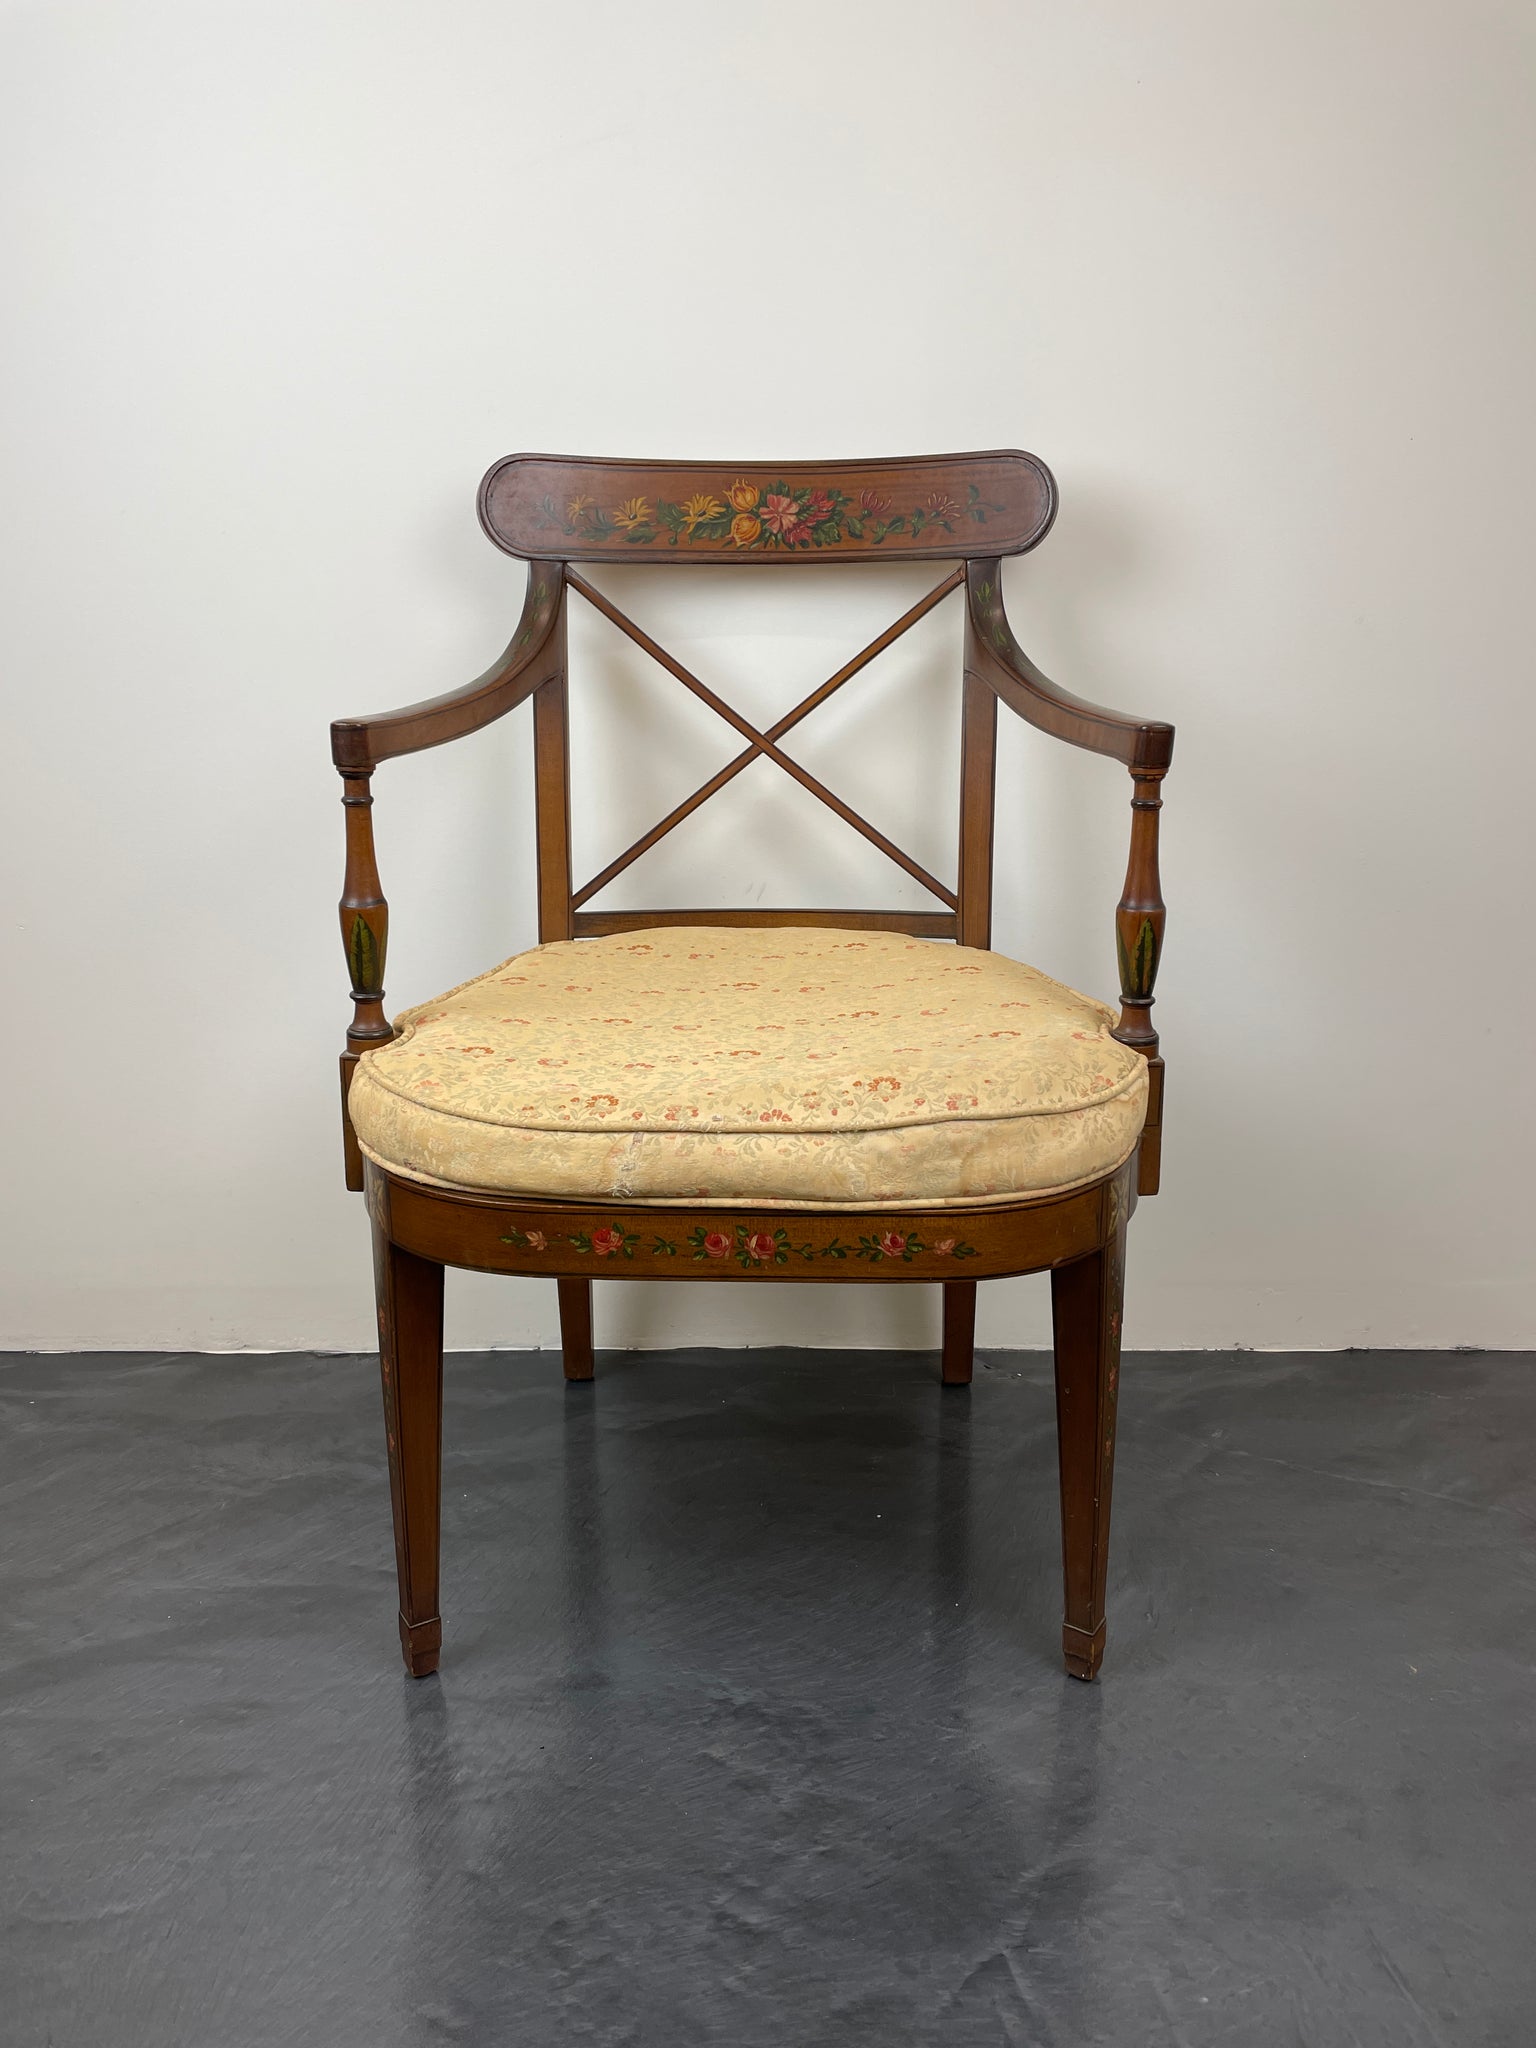 [Wallace Stevens]  Chair from the Wallace Stevens Collection, ca. 1930